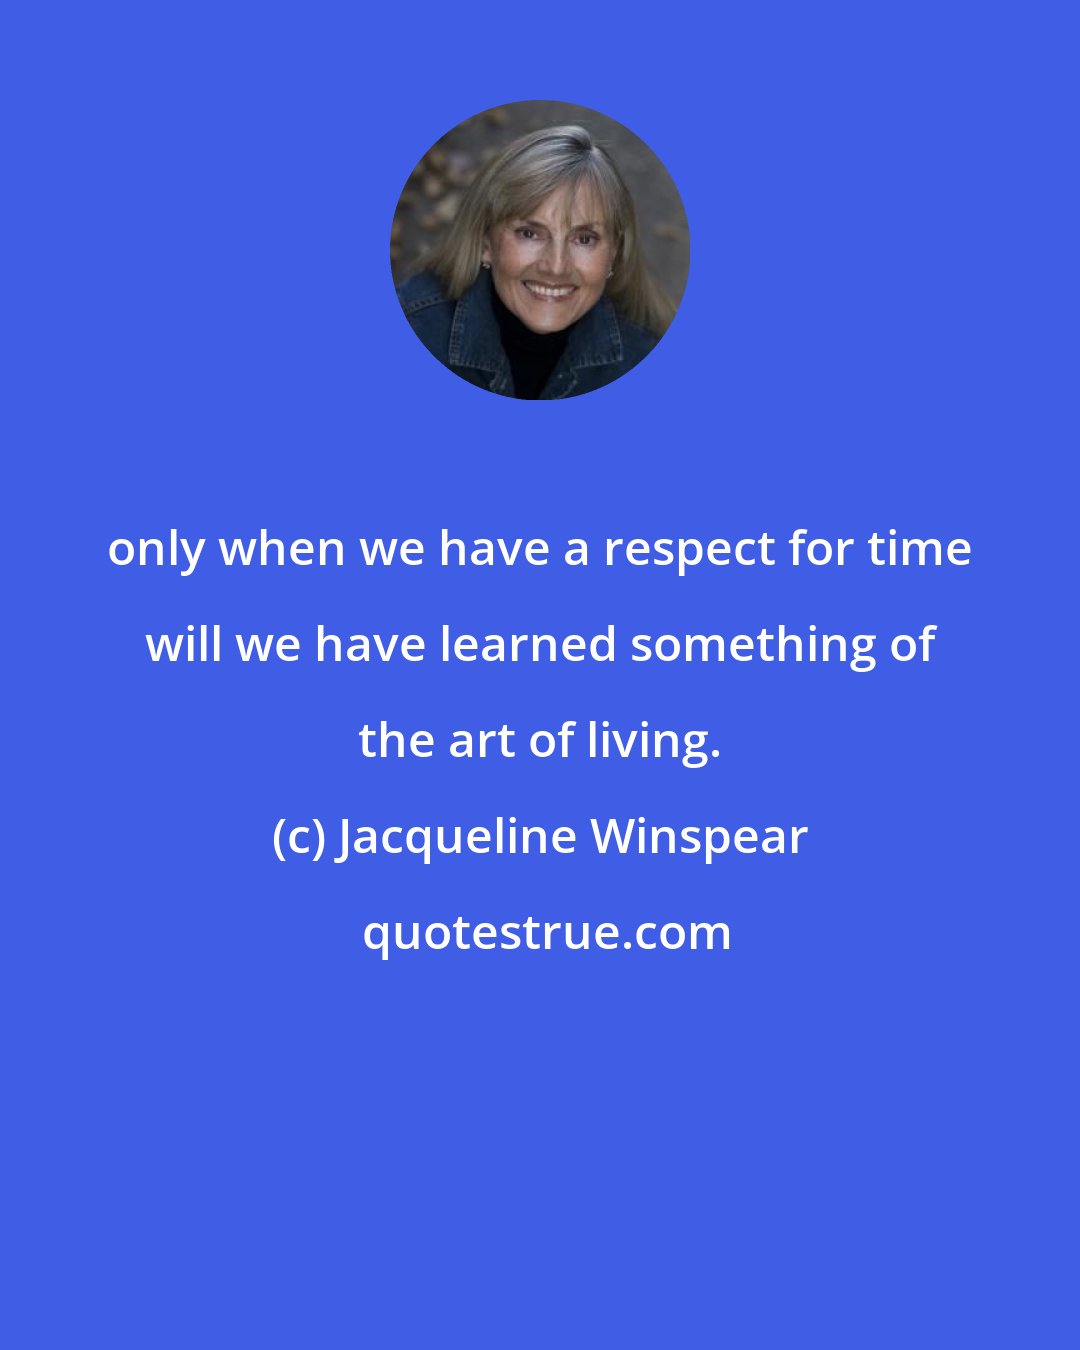 Jacqueline Winspear: only when we have a respect for time will we have learned something of the art of living.